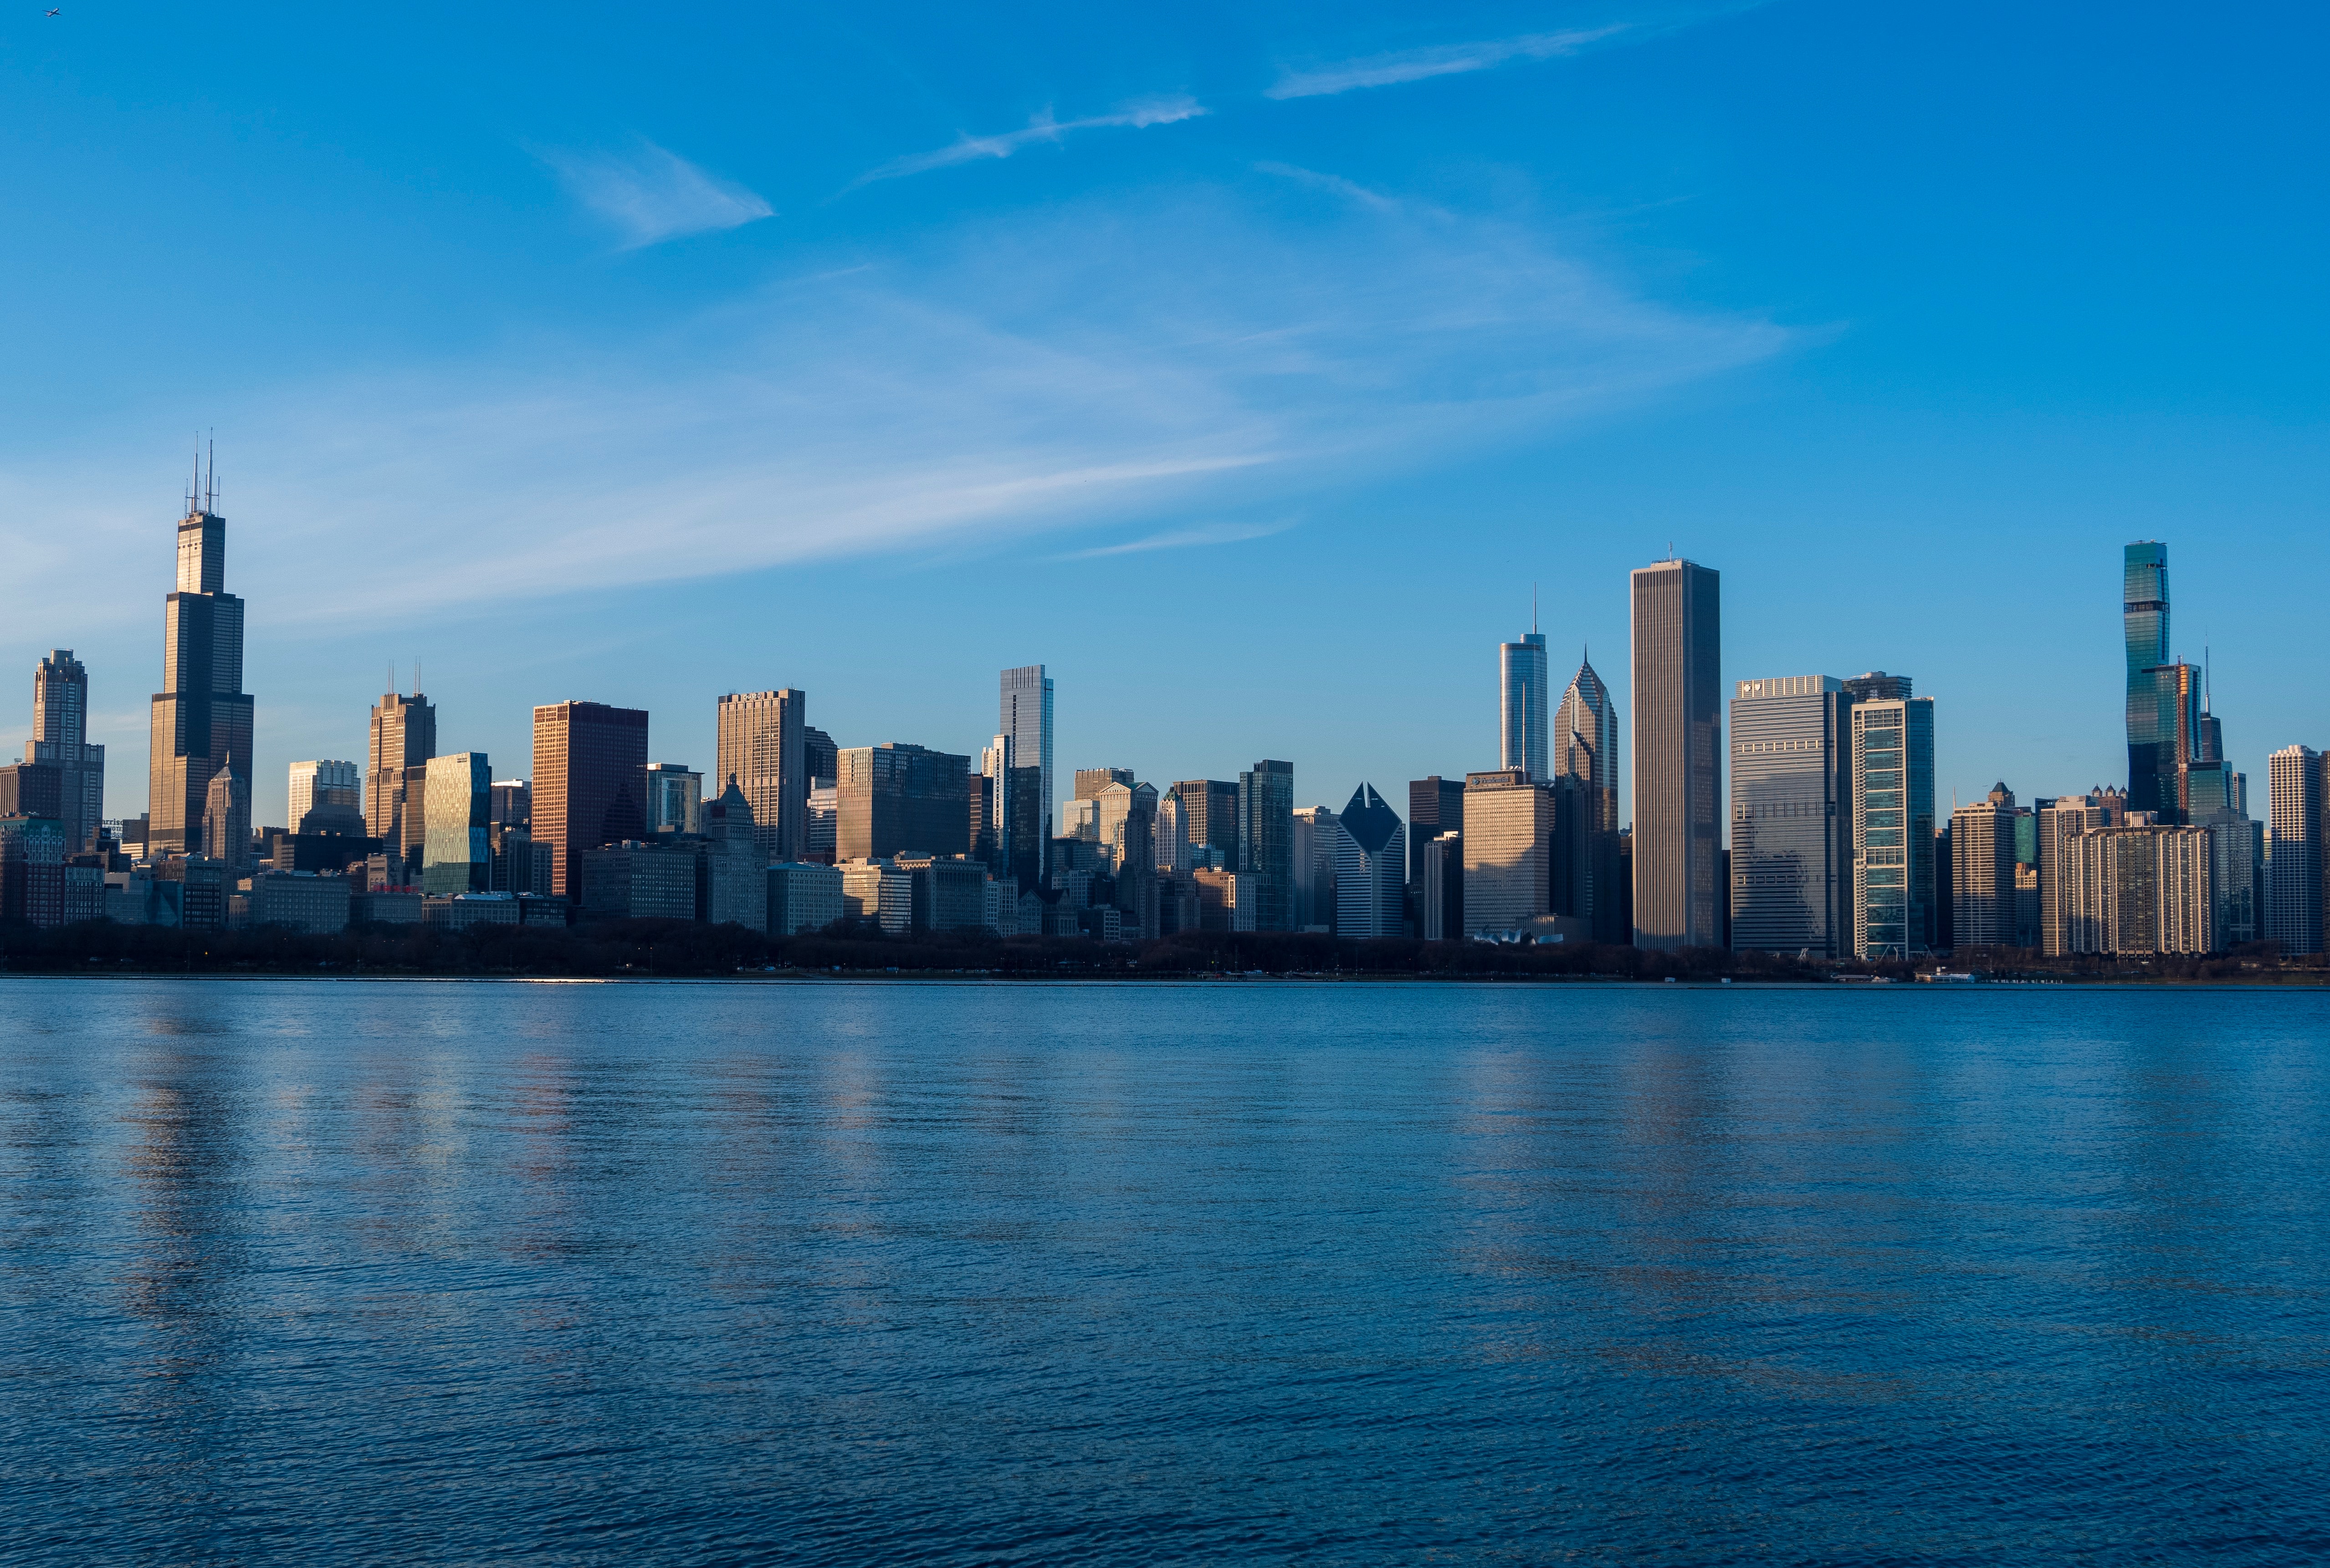 IS CHICAGO A GOOD MARKET FOR REAL ESTATE INVESTMENTS?